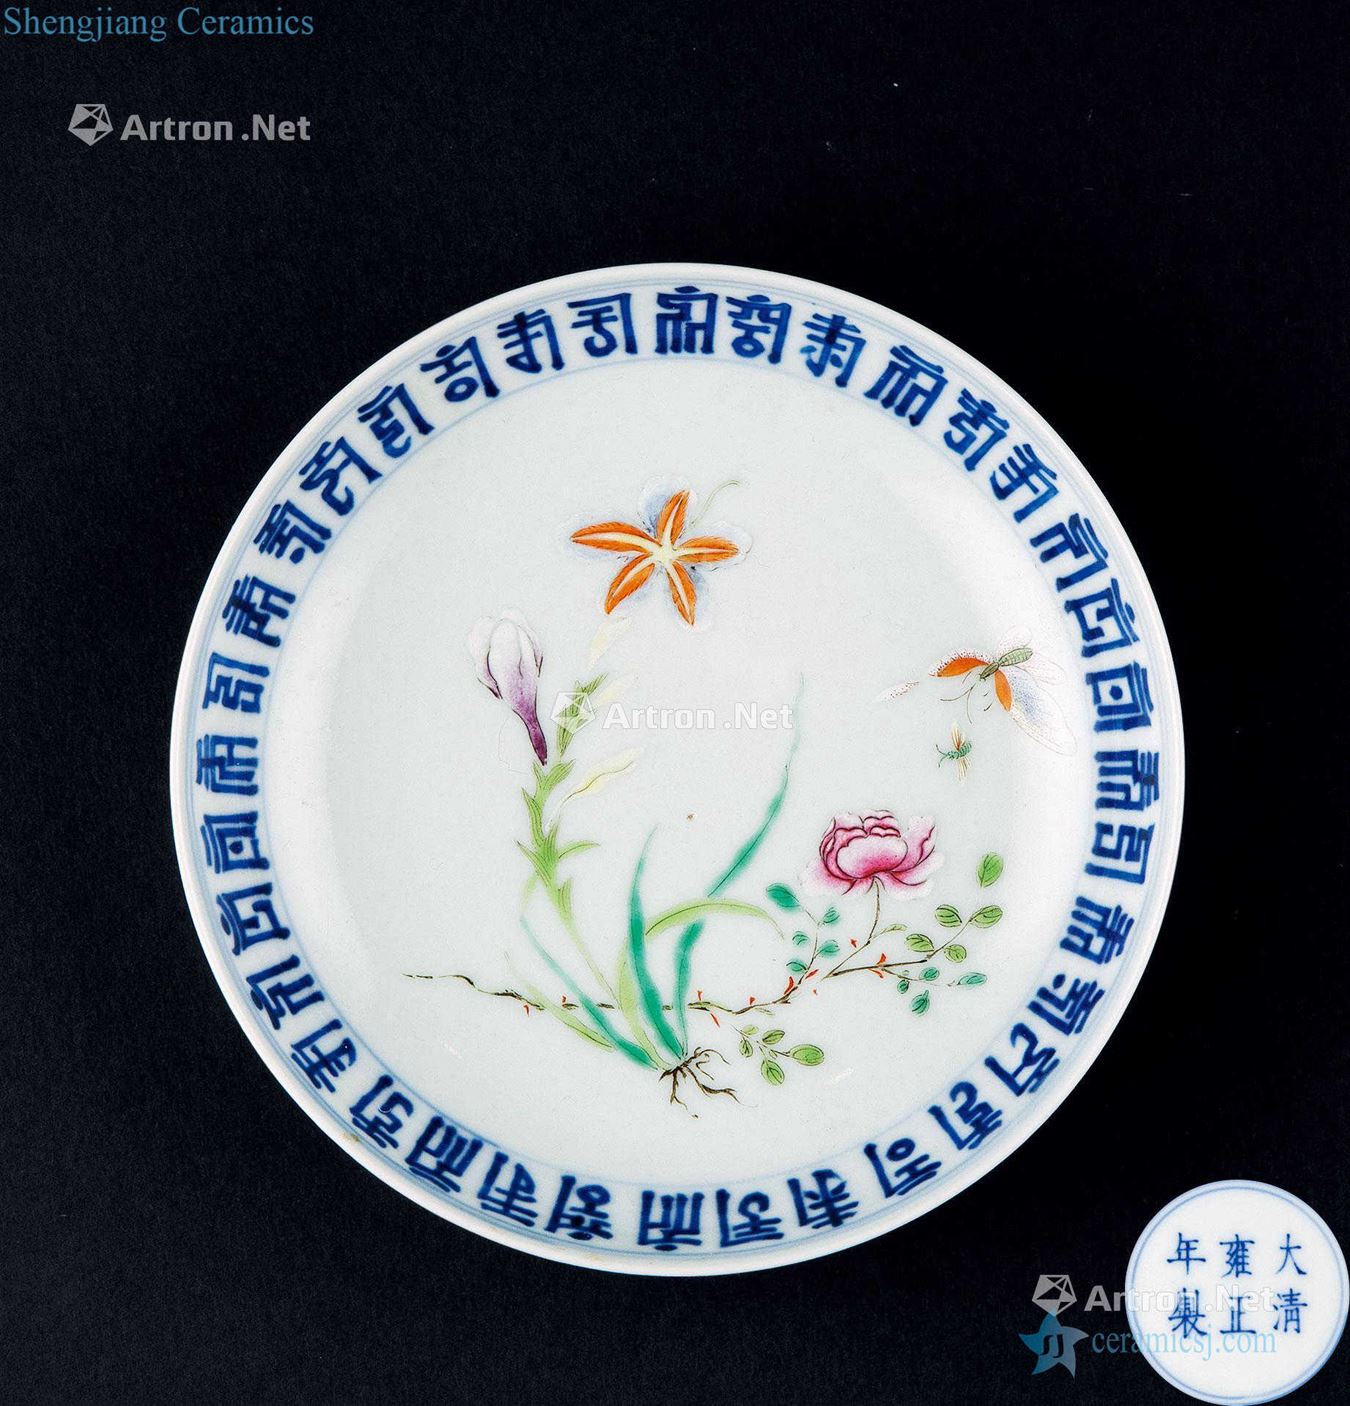 In the qing dynasty (1644-1911) blue and white enamel butterfly tray